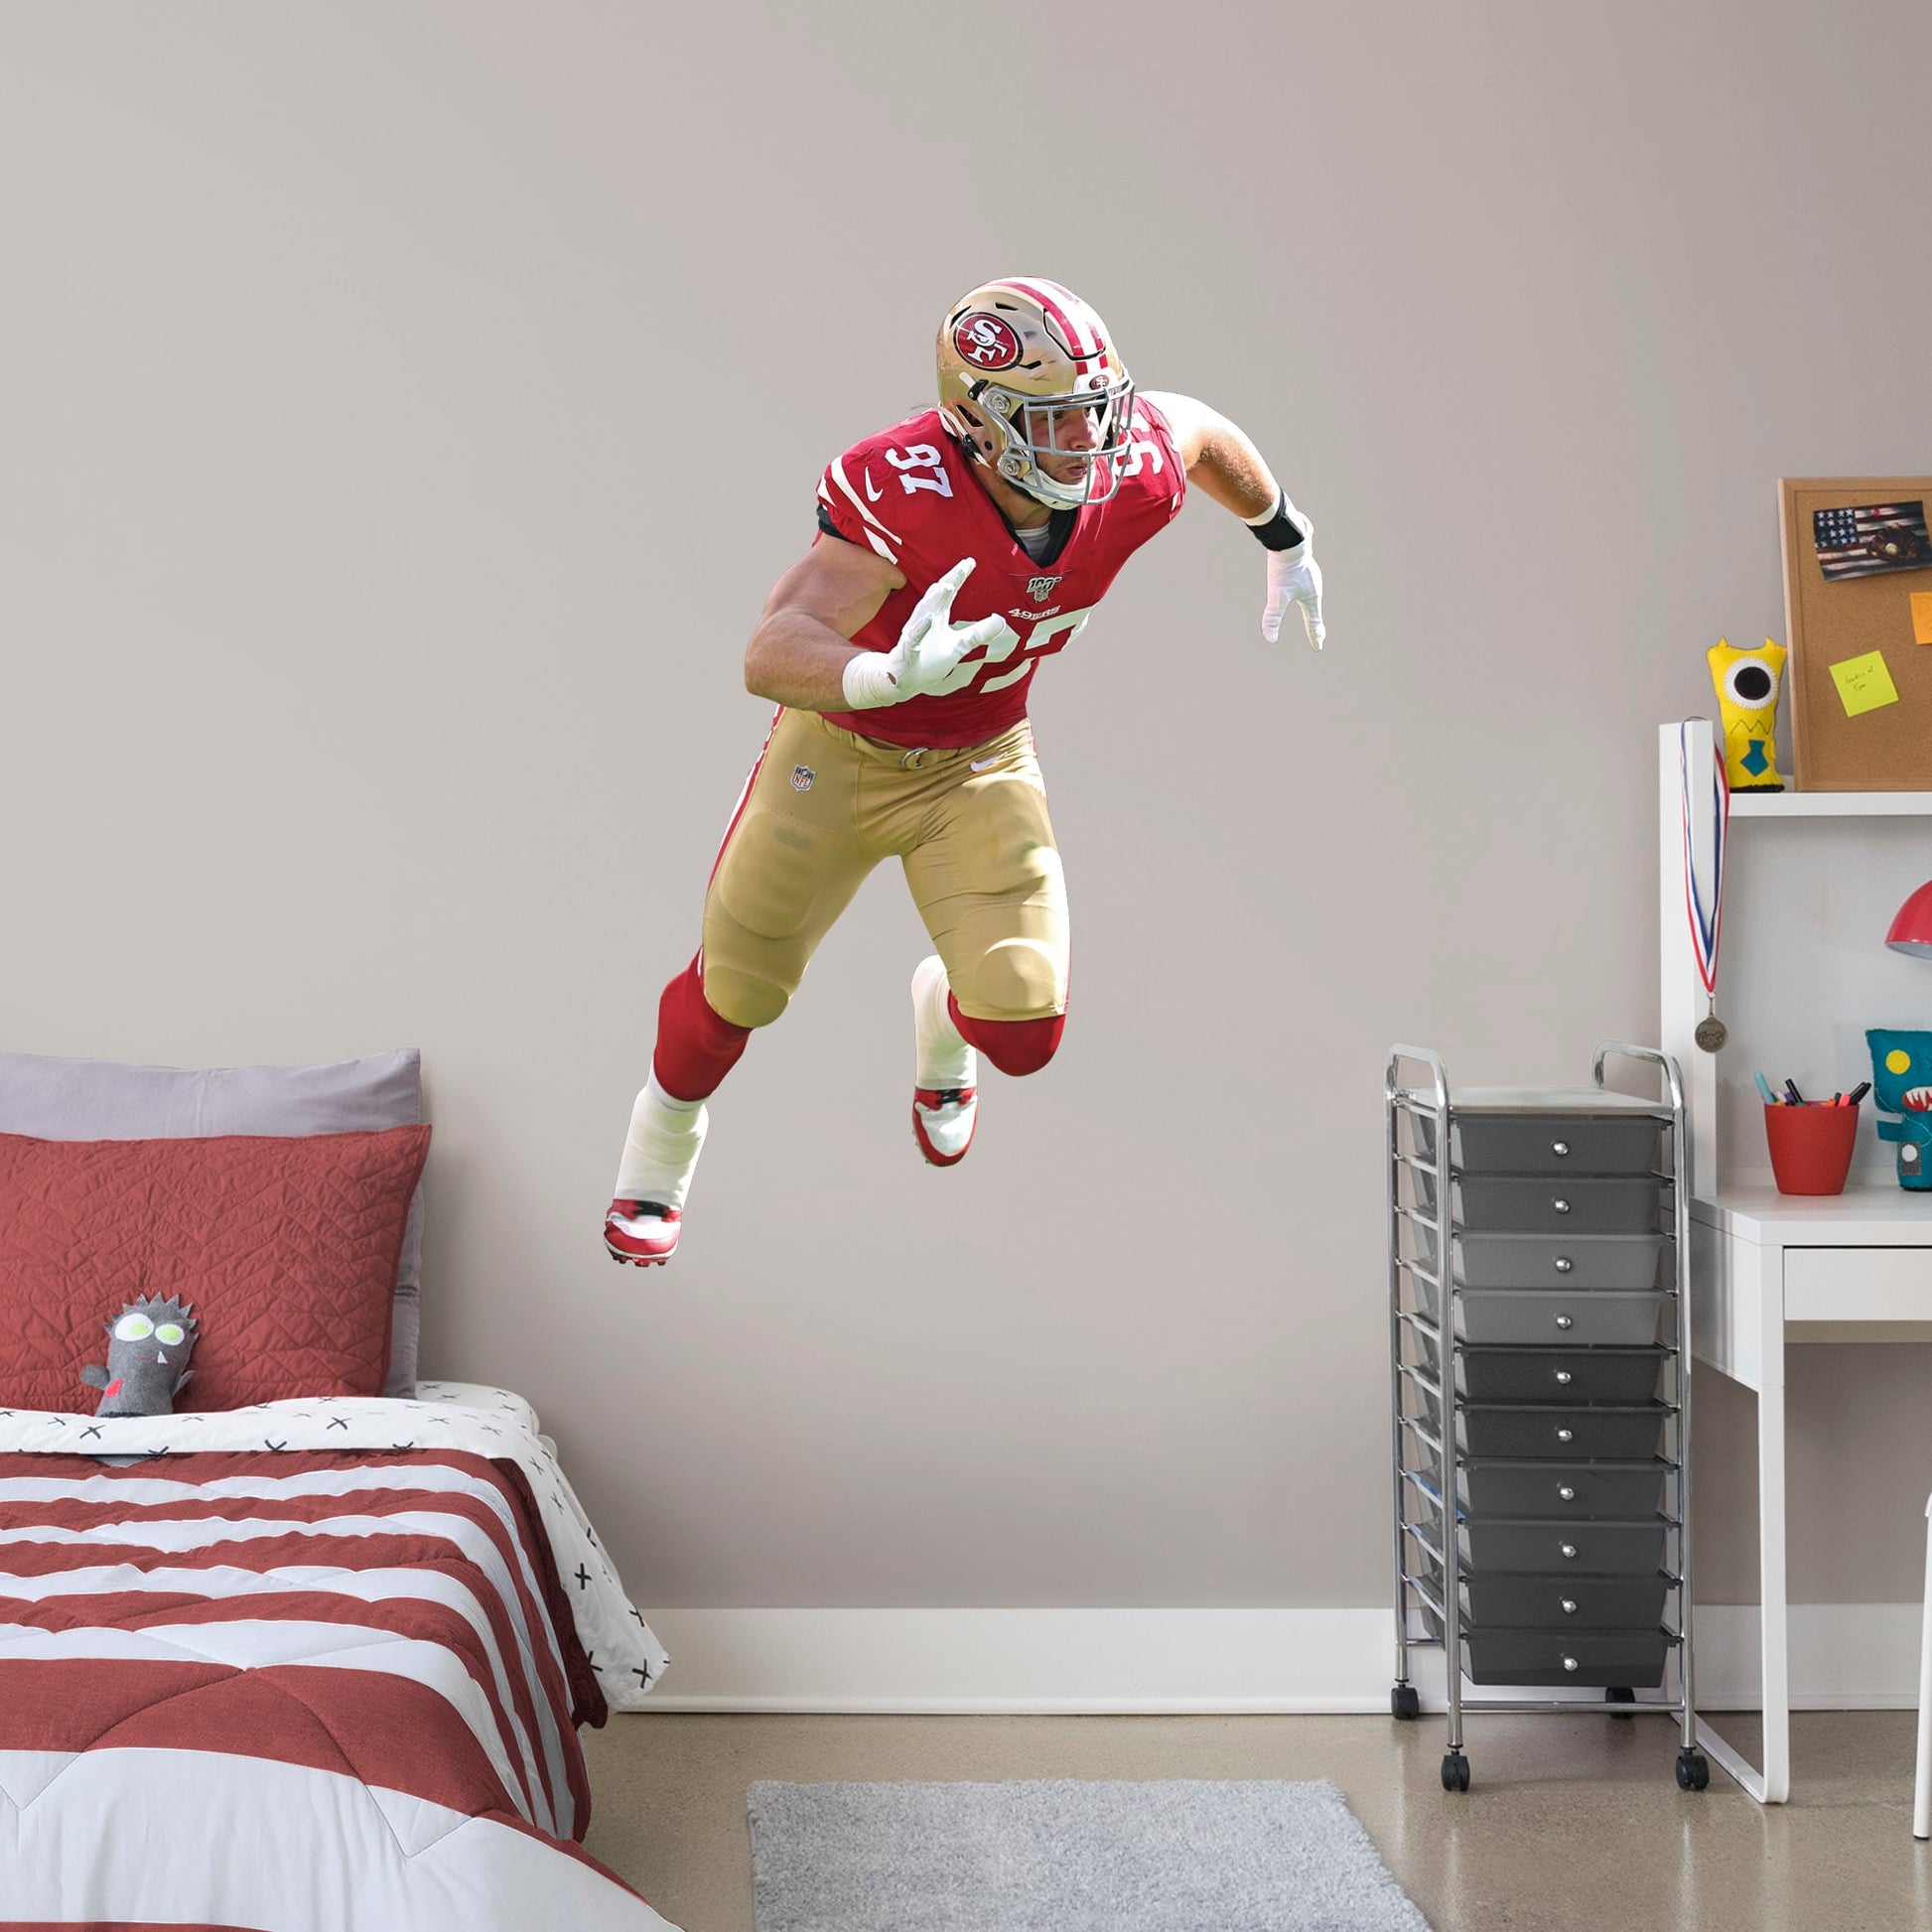 Giant Athlete + 2 Decals (35"W x 48"H) NFL pundits tagged Nick Bosa a can't-miss prospect, and Frisco's No. 2 draft pick dug deep and struck gold in 2019. Named the NFL Defensive Rookie of the Year, the sack master from Ohio State led the 49ers to the NFC title. Now you can honor one of Sourdough Sam's favorite sons with an officially licensed wall decal. Constructed from high-quality vinyl, the decal looks good in a bedroom or bonus room and is a no-brainer gift for any member of The Faithful.